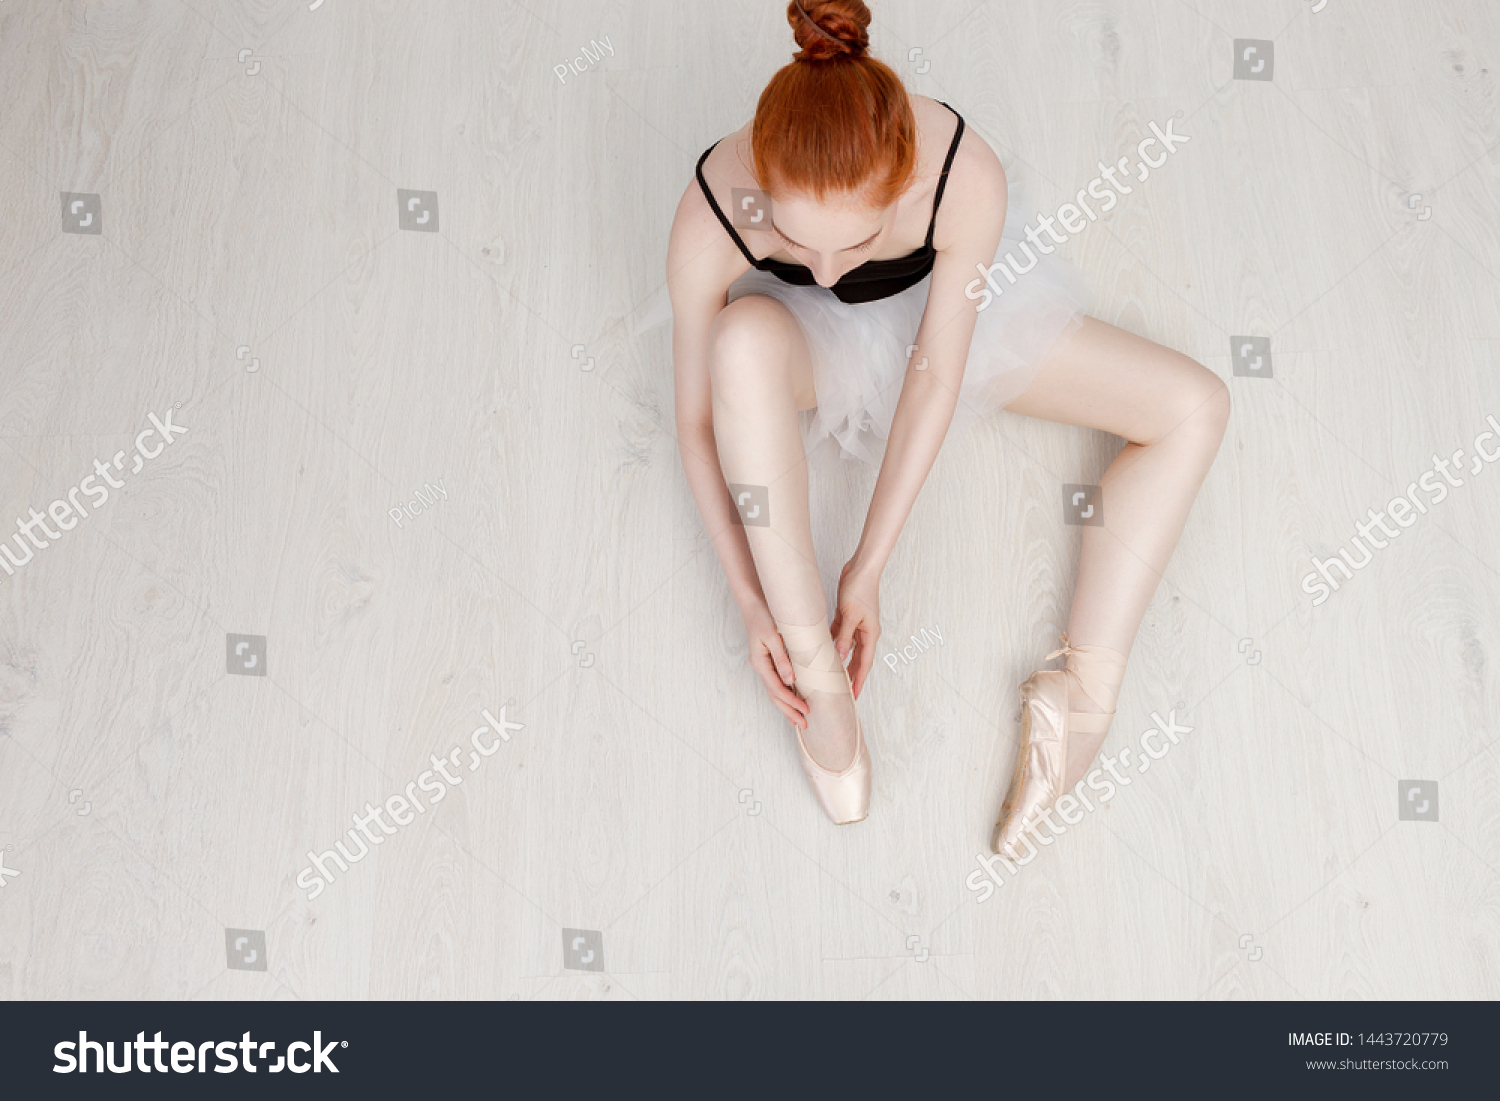 Nice ballerina sits on the white floor and dresses a beige pointe shoe in the studio. She wears a light dance wear and a peach tutu. Top view photo. Horizontal. Copy space #1443720779